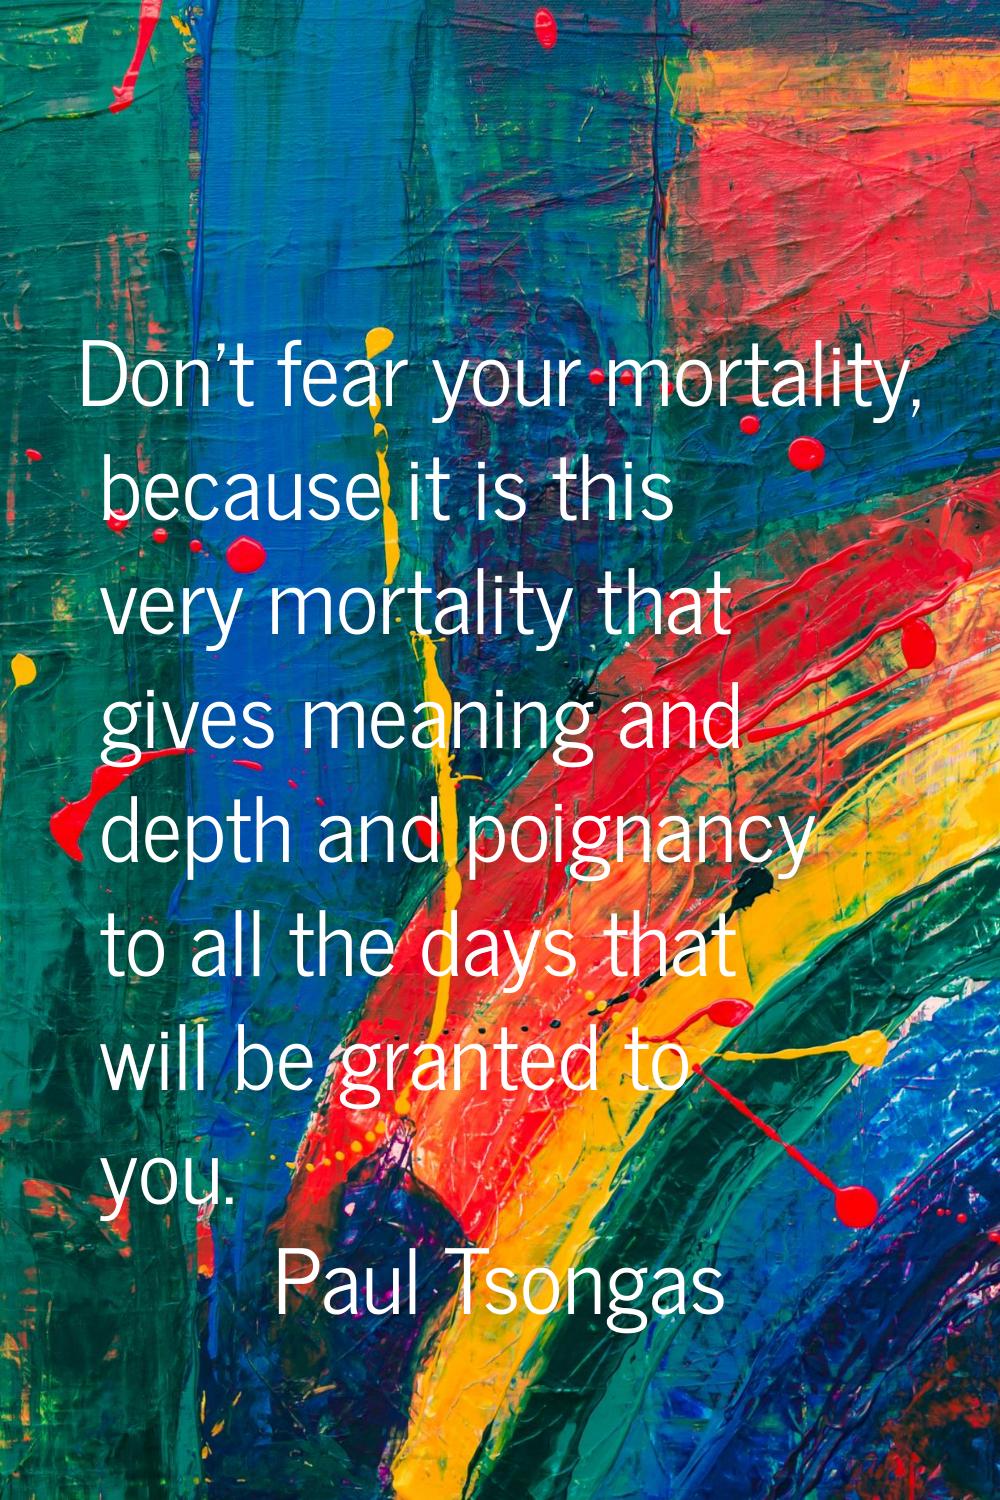 Don't fear your mortality, because it is this very mortality that gives meaning and depth and poign